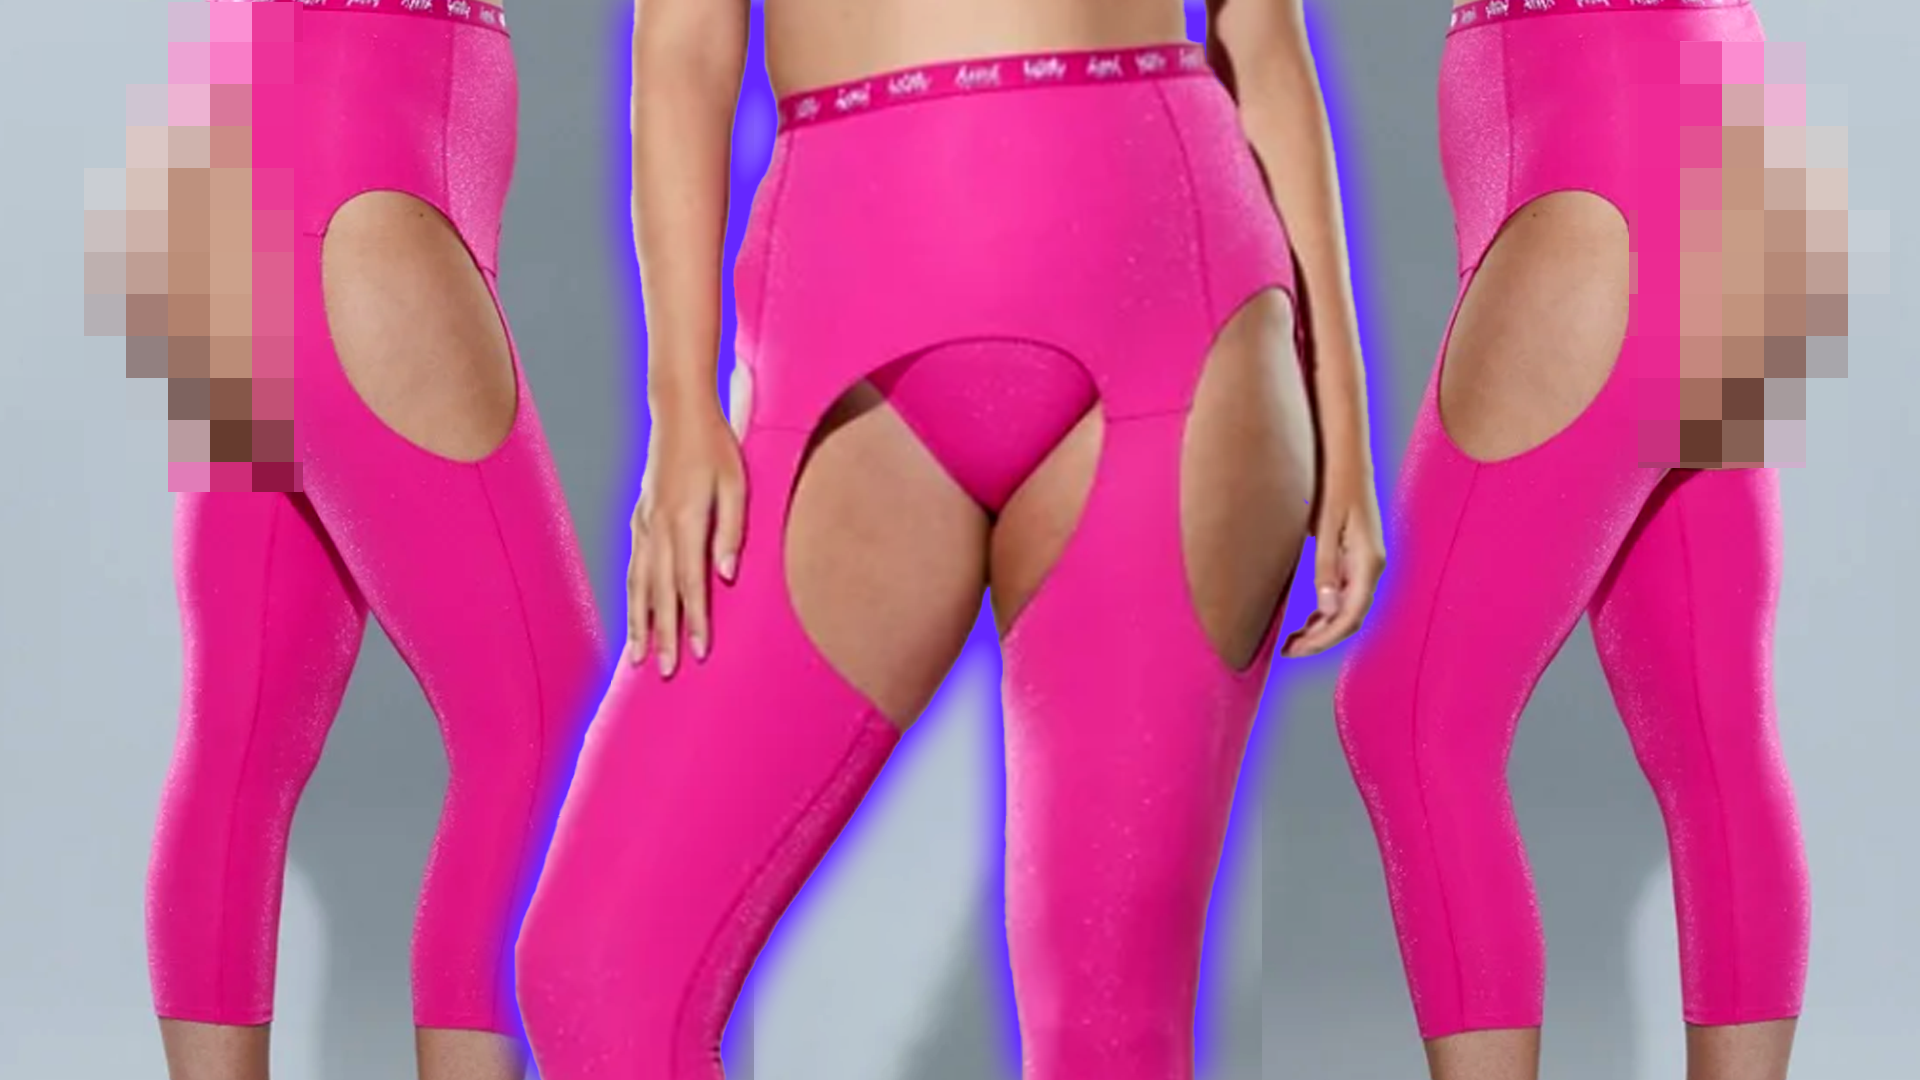 http://www.theedge.co.nz/content/dam/the-edge/images/whats-good/2023/1/EDG-AsslessLeggings-HERO.png